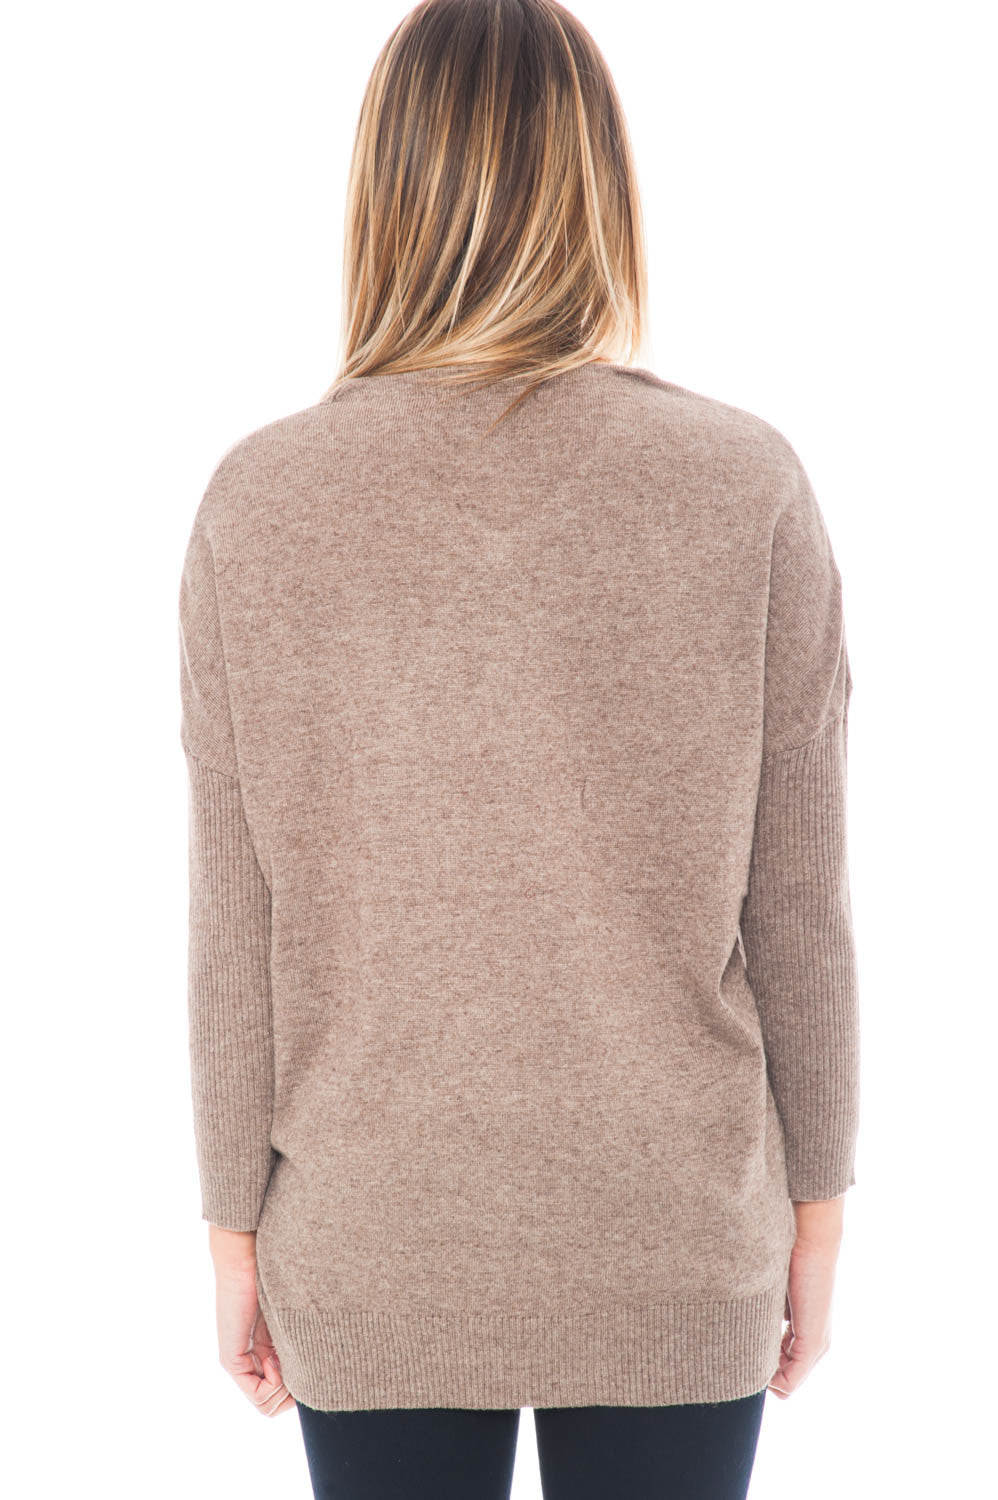 Sweater - Asymmetrical Cut Tunic with an Overlap Front